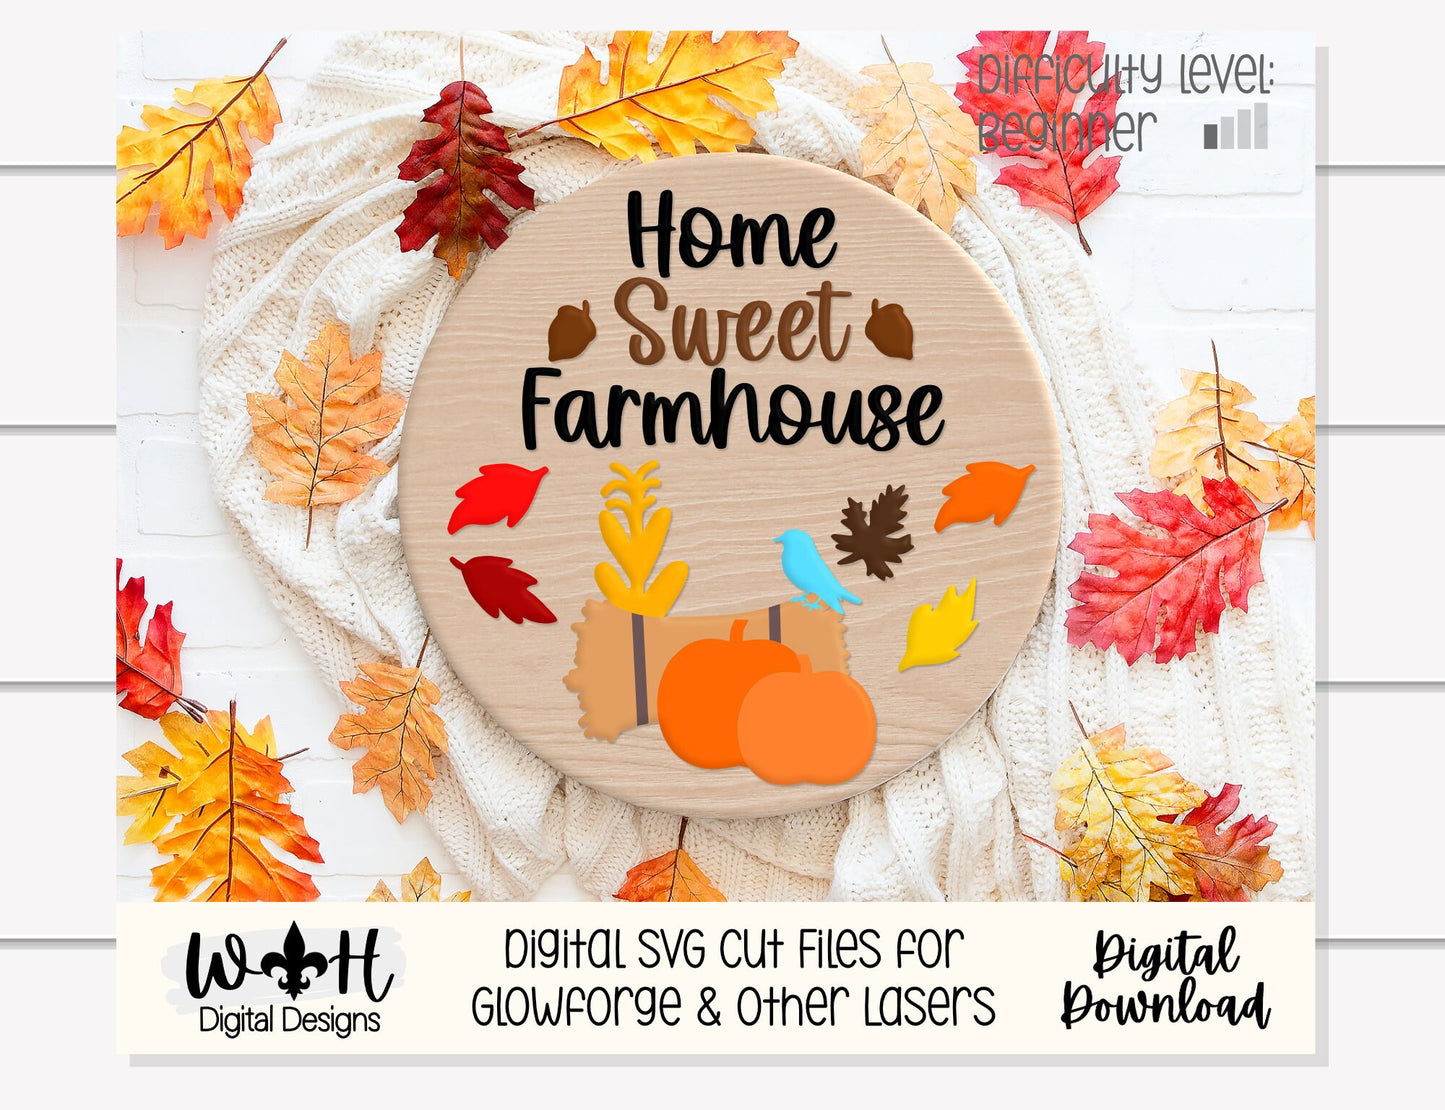 Home Sweet Farmhouse Autumn Seasonal Round - Fall Door Hanger - Files for Sign Making - SVG Cut File For Glowforge Pro - Digital File